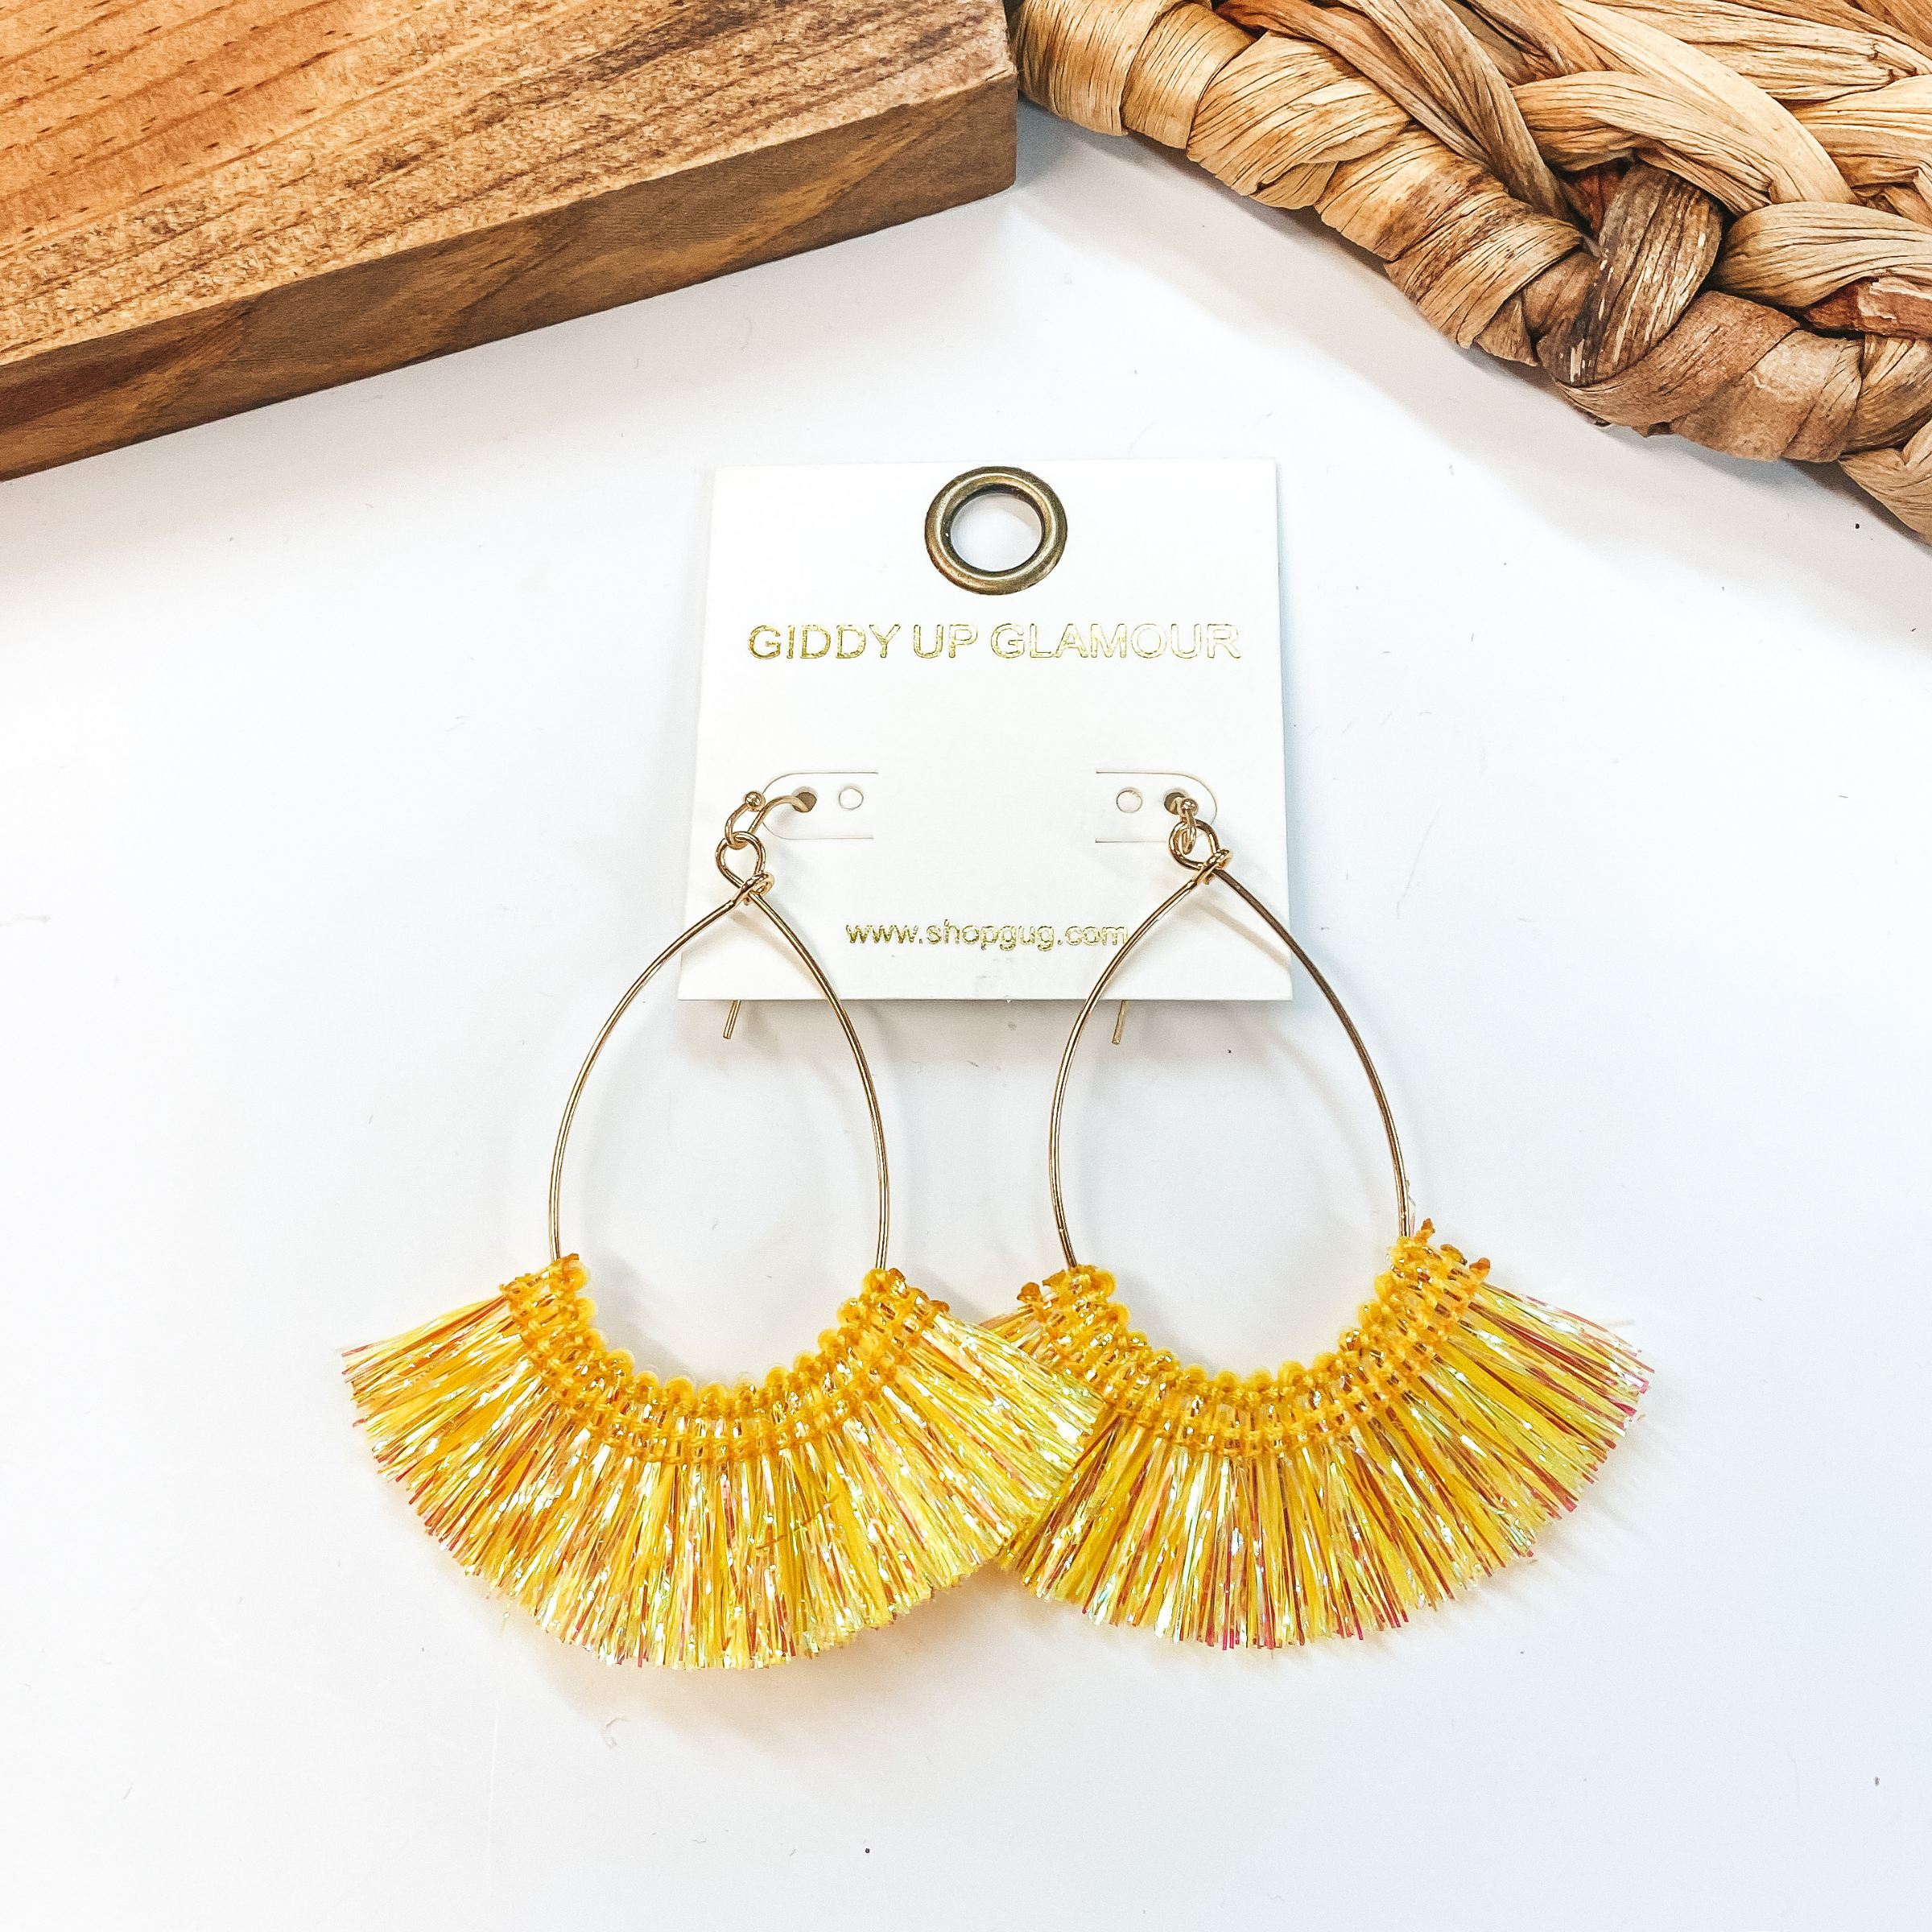 Tinsel Fringe Hoop Earrings in Iridescent Yellow - Giddy Up Glamour Boutique